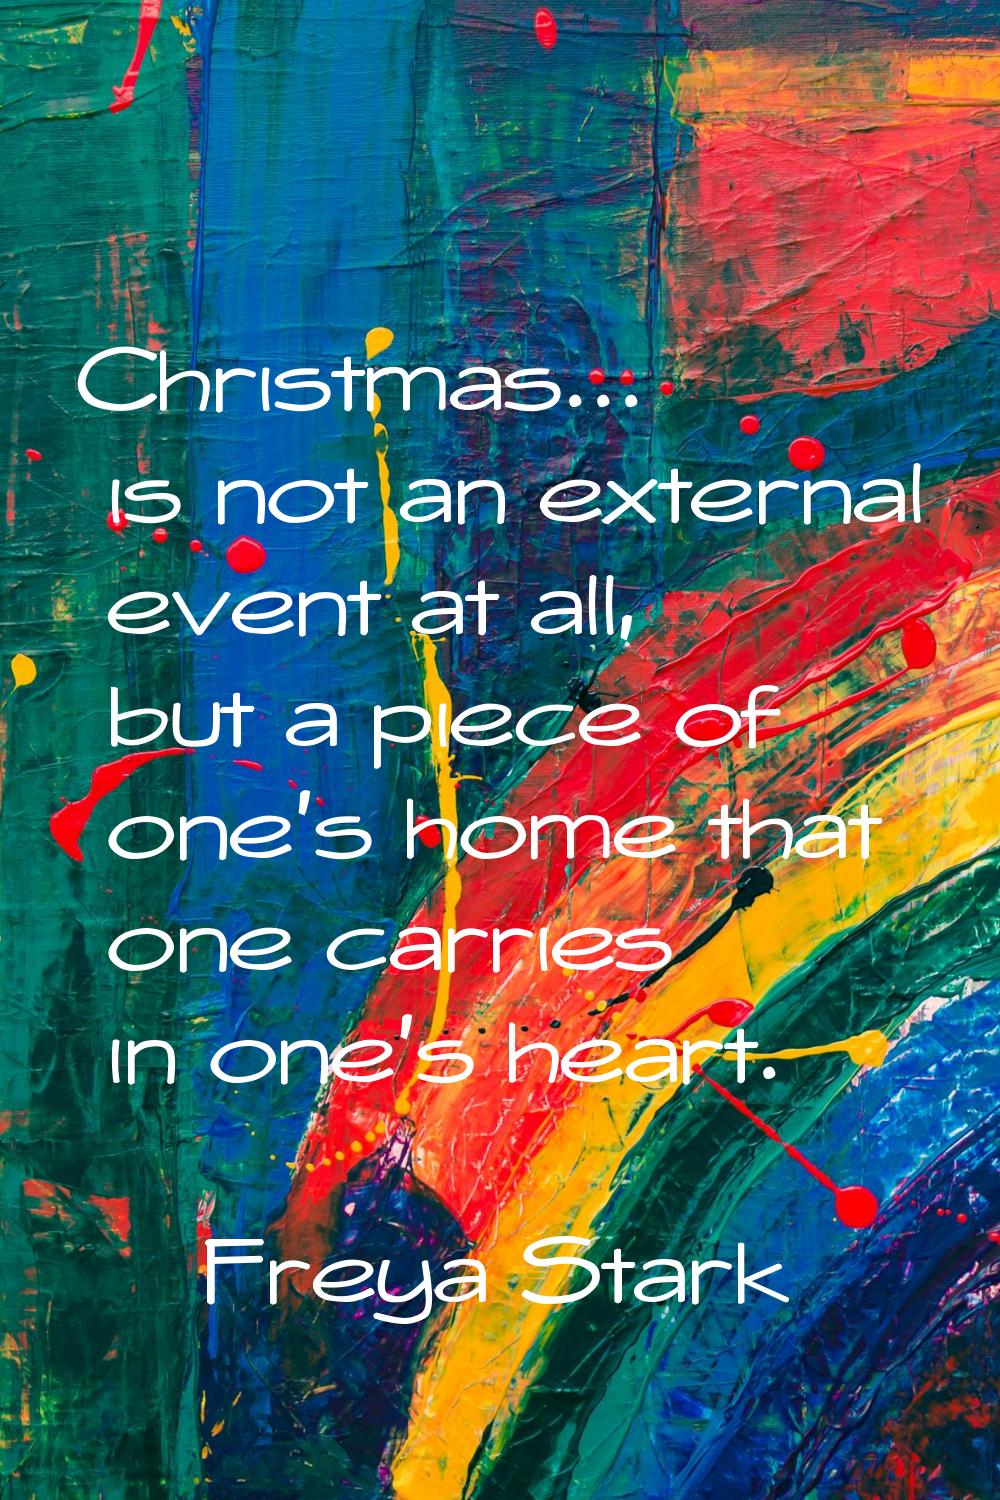 Christmas... is not an external event at all, but a piece of one's home that one carries in one's h